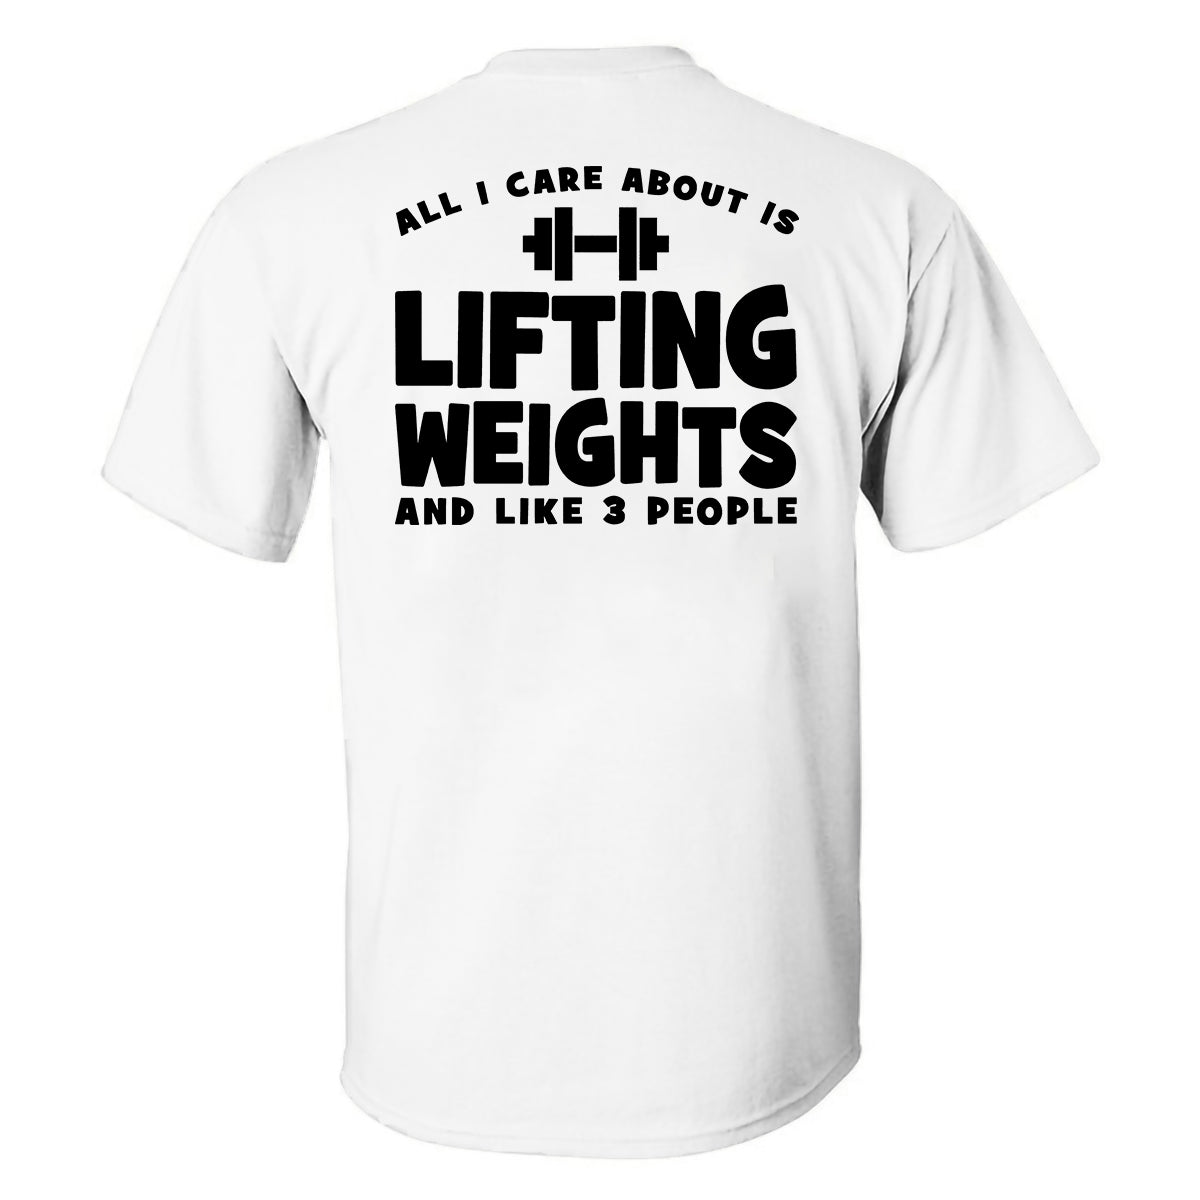 All I Care About Is Lifting Weights Printed Men's T-shirt